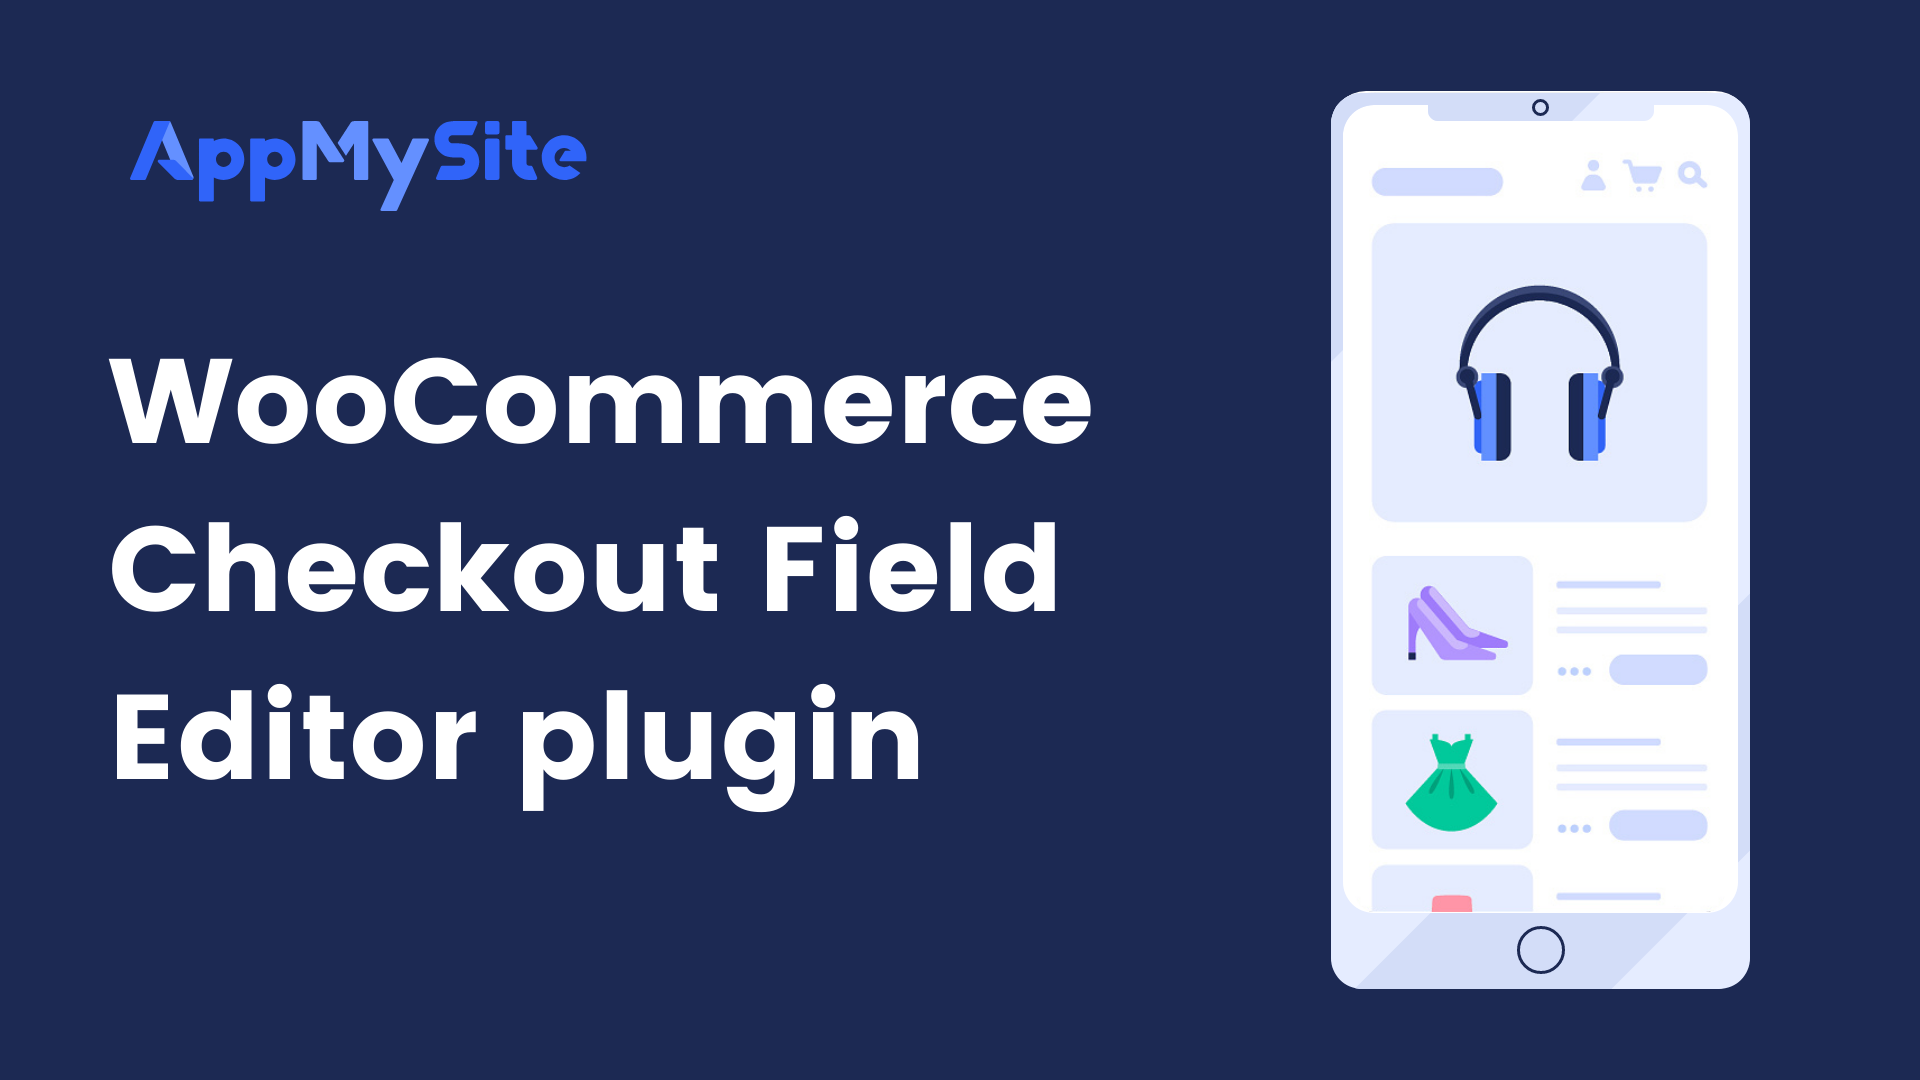 https://www.appmysite.com/support/wp-content/uploads/2021/03/WooCommerce-Checkout-Field-Editor.png